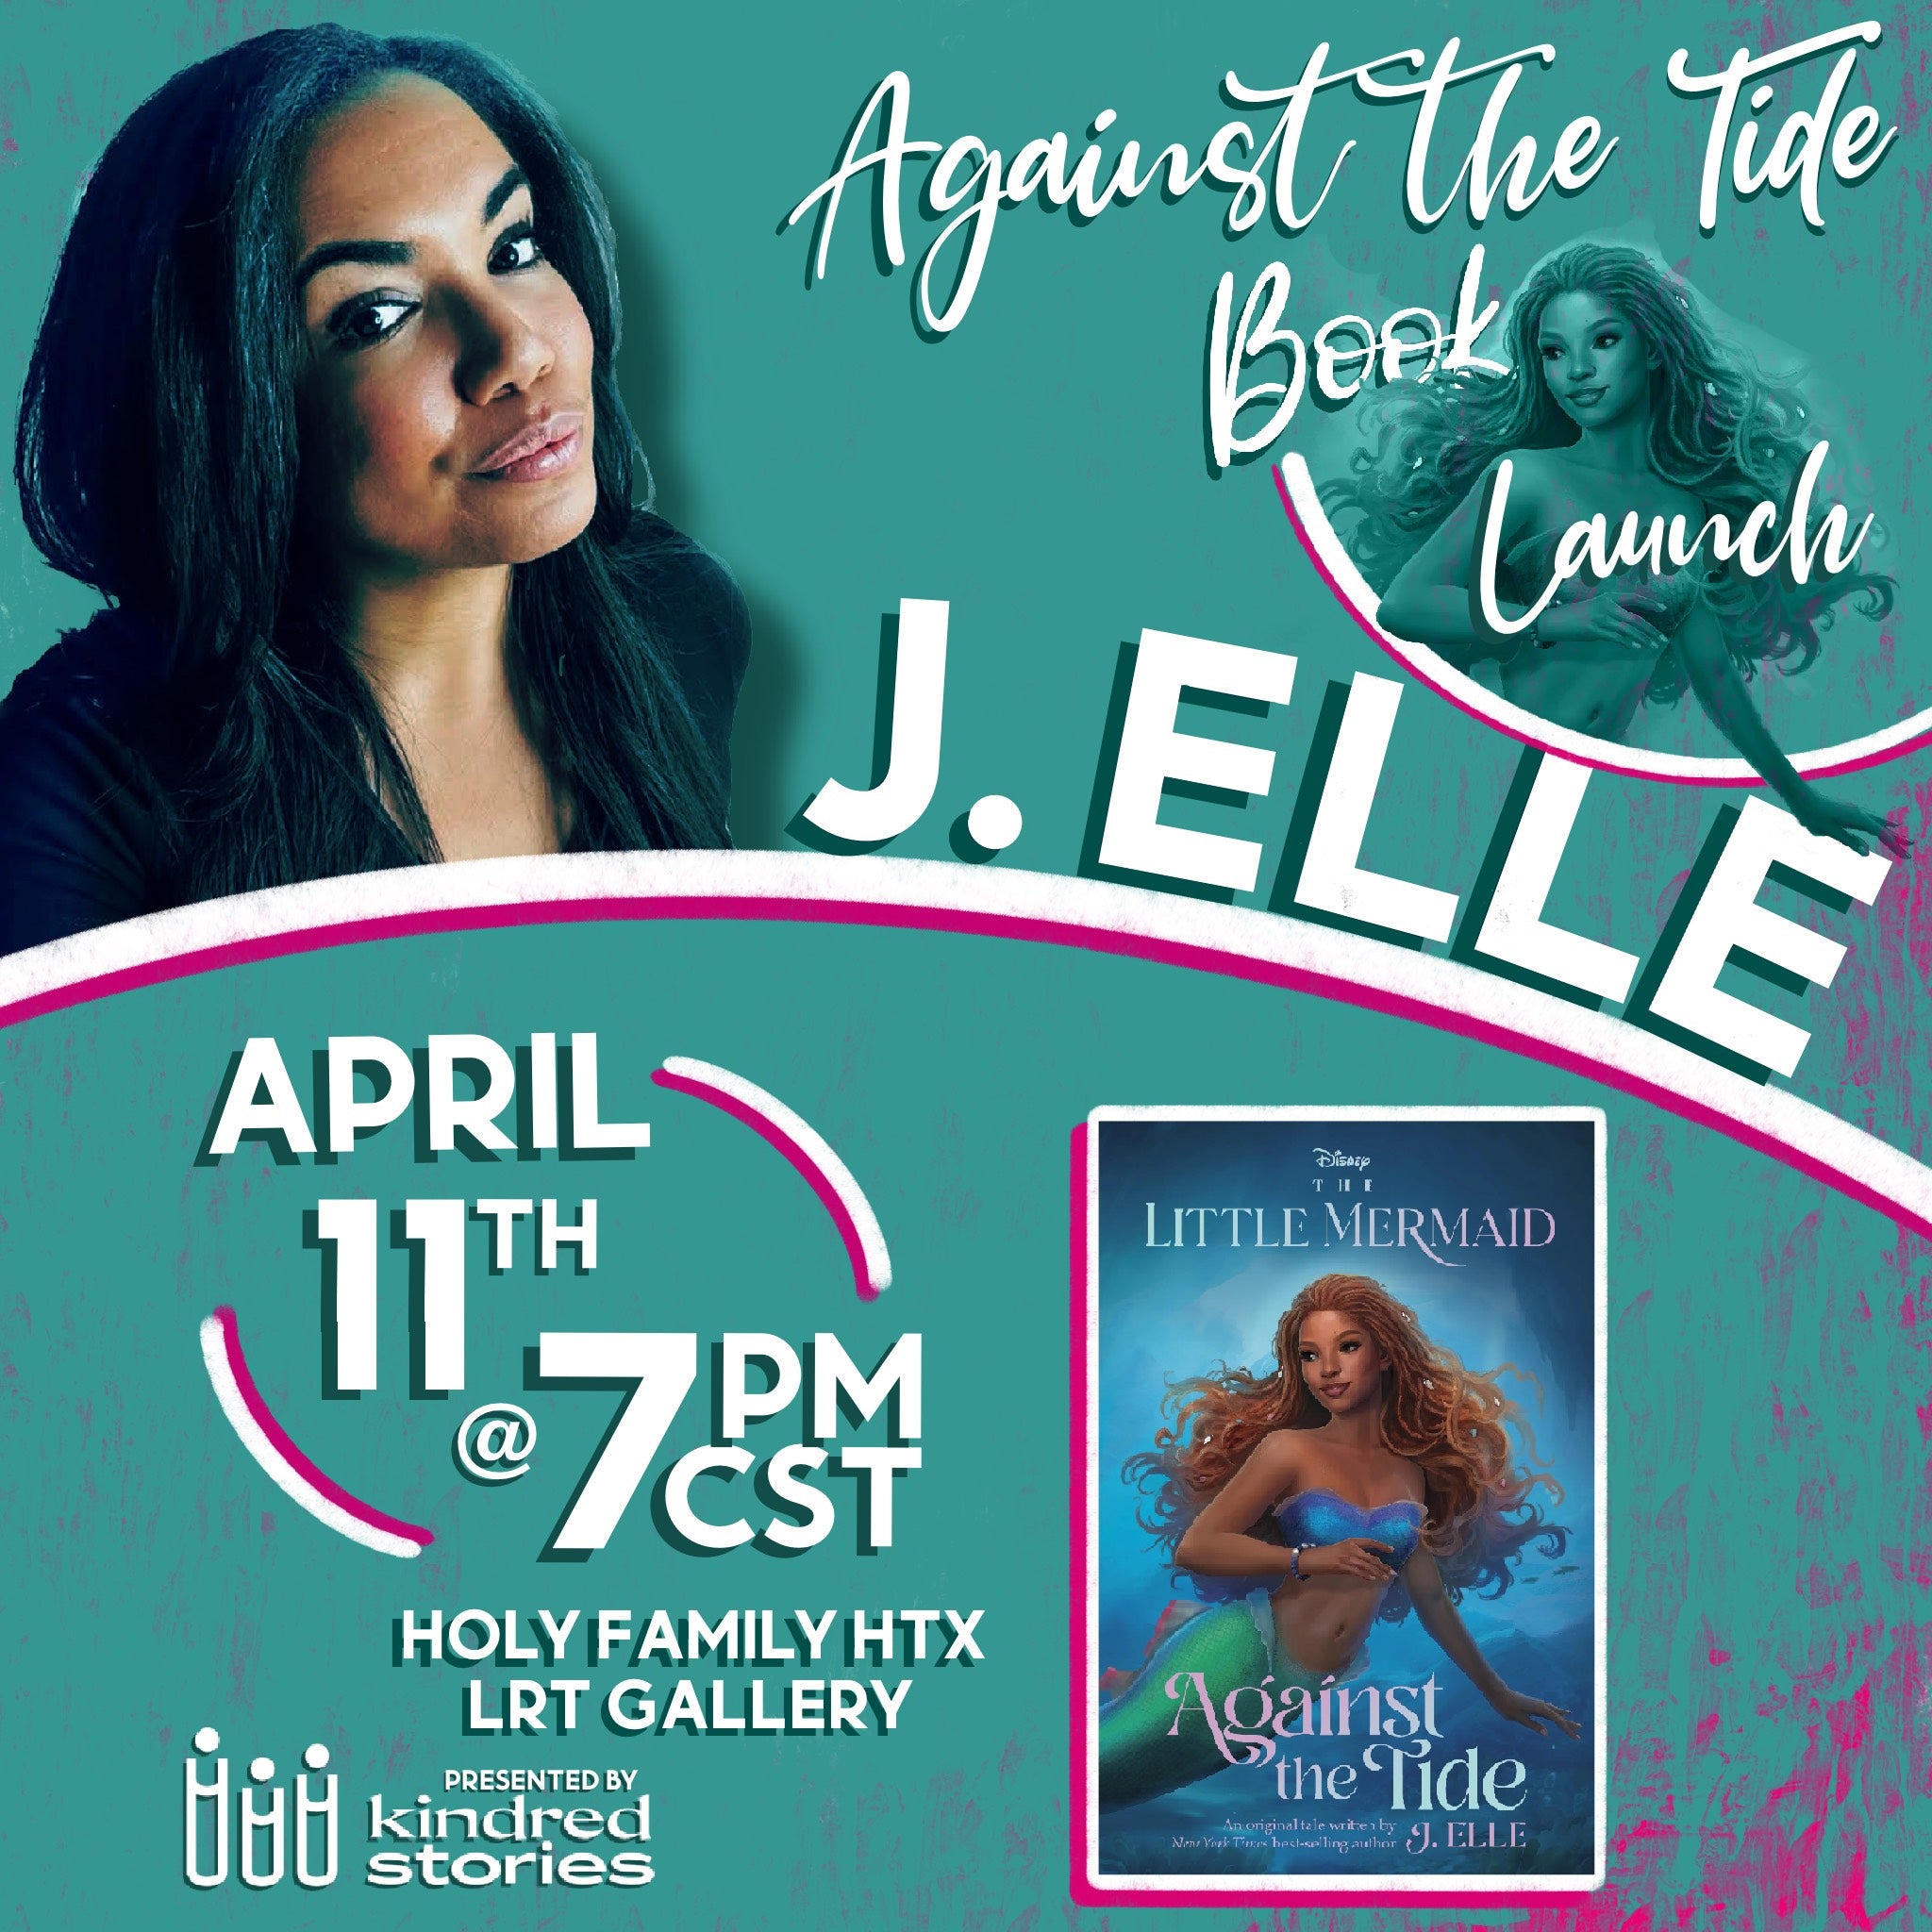 IRL AUTHOR TALK: The Little Mermaid with J.Elle-April 11 at 7PM CST